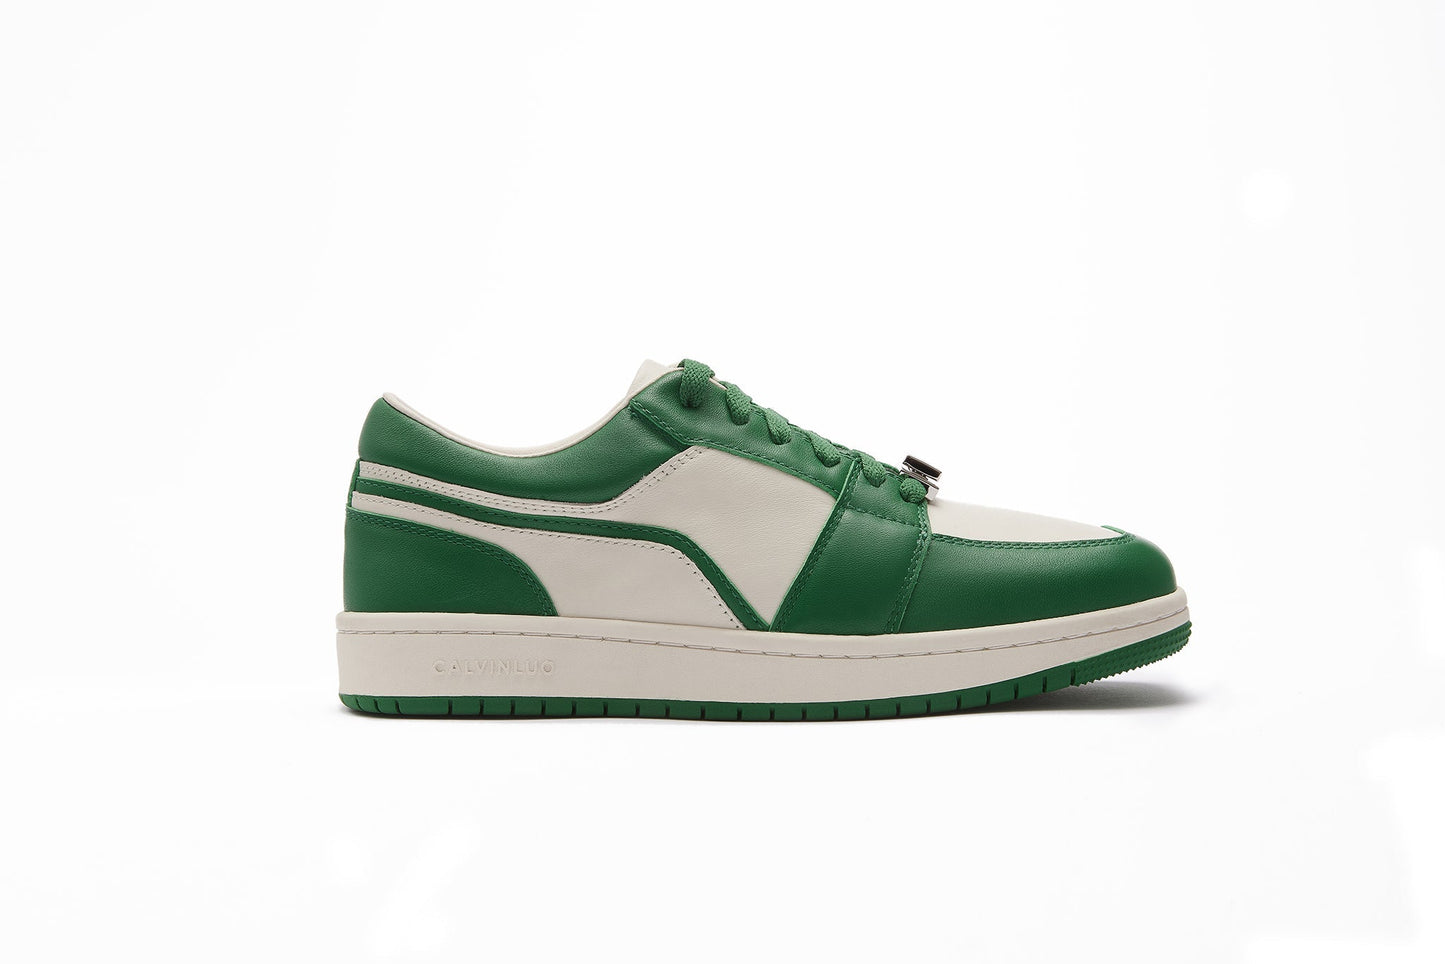 CALVIN LUO Green Square Toe Low Sneakers | MADA IN CHINA